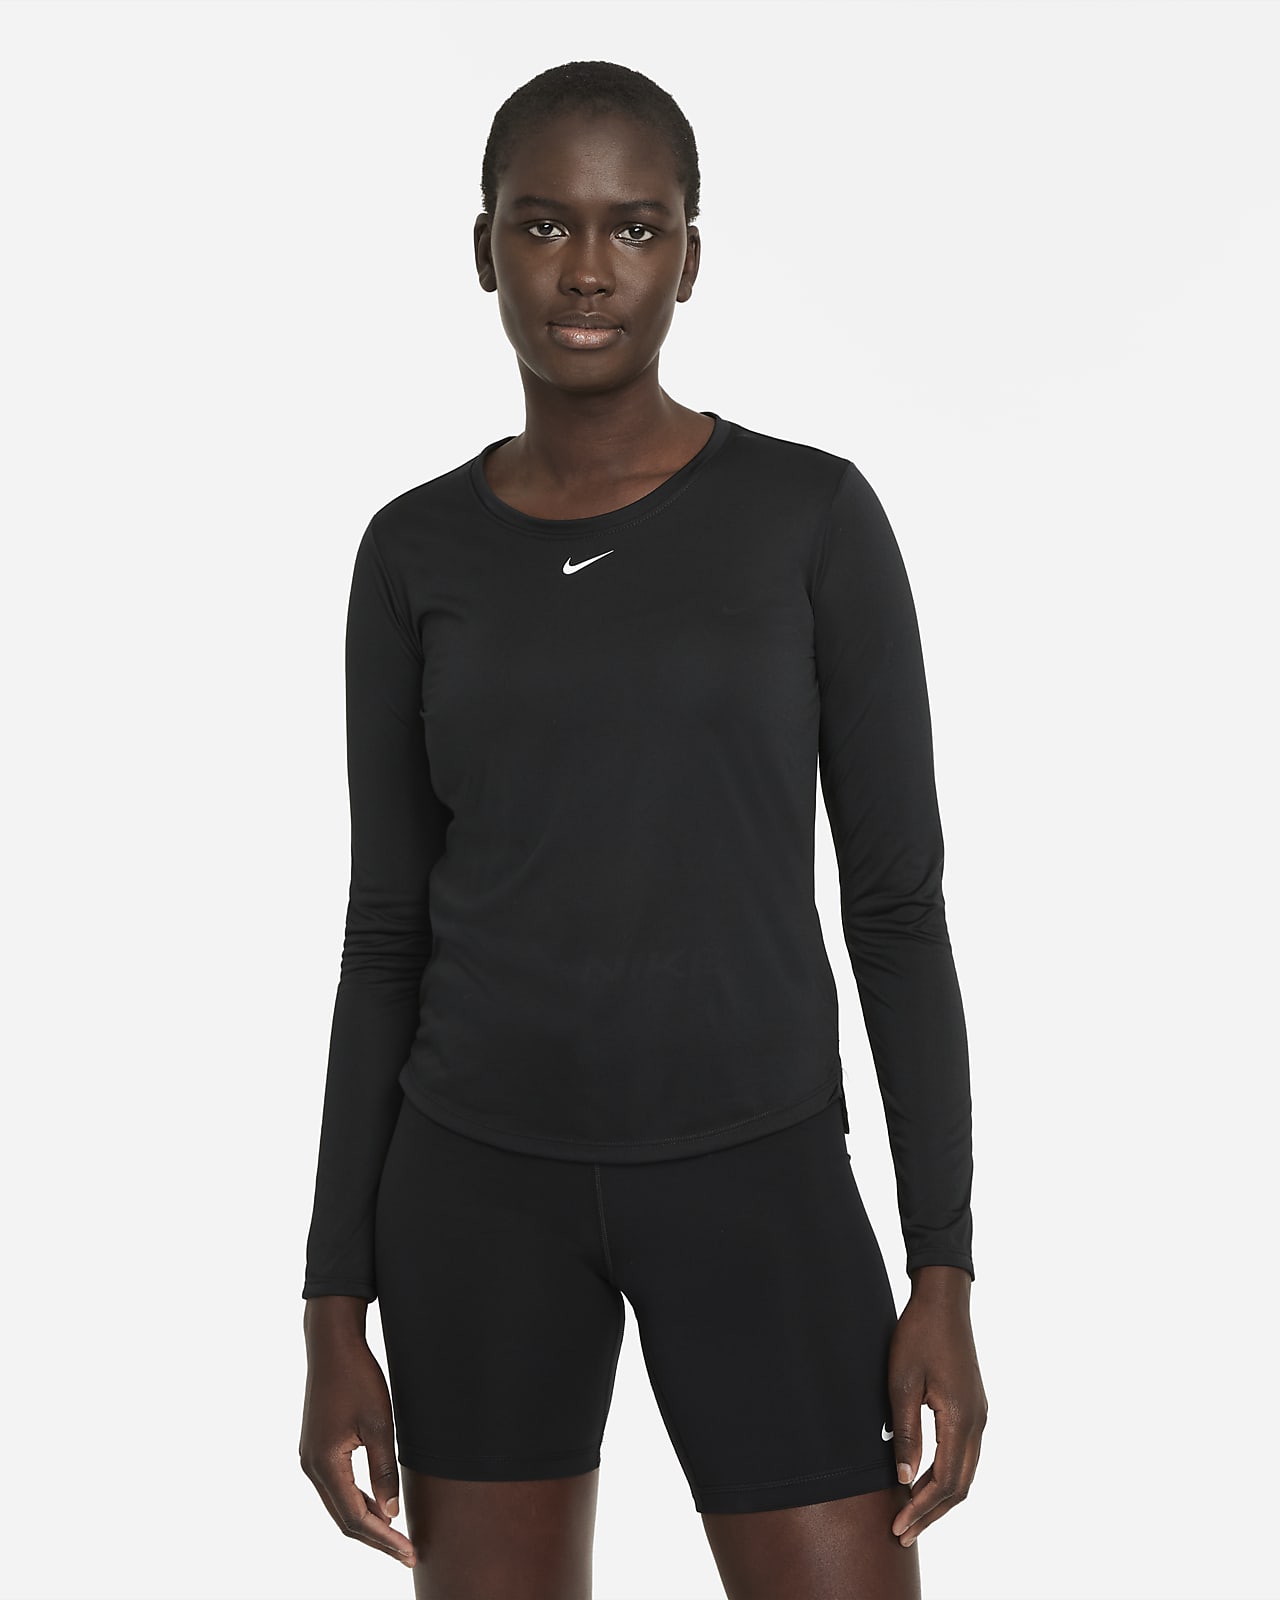 https://static.nike.com/a/images/t_PDP_1280_v1/f_auto,q_auto:eco/6be8f5ea-d1c2-4445-b515-de6bdb611a8f/dri-fit-one-standard-fit-long-sleeve-top-87nvJ9.png